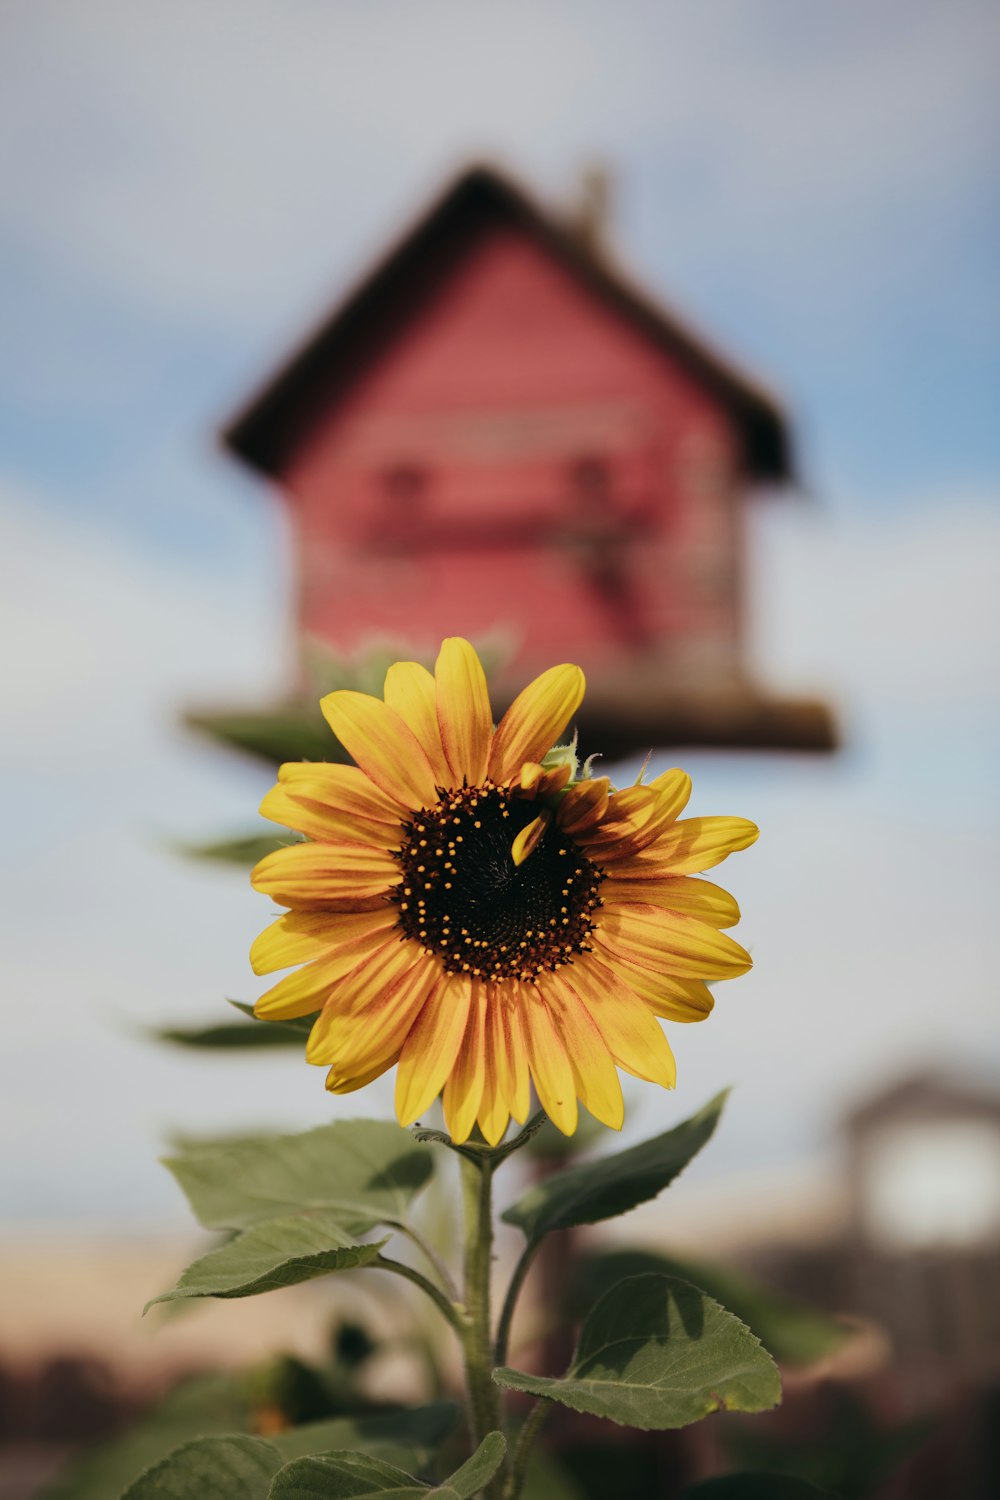 a sunflower in front of a red house